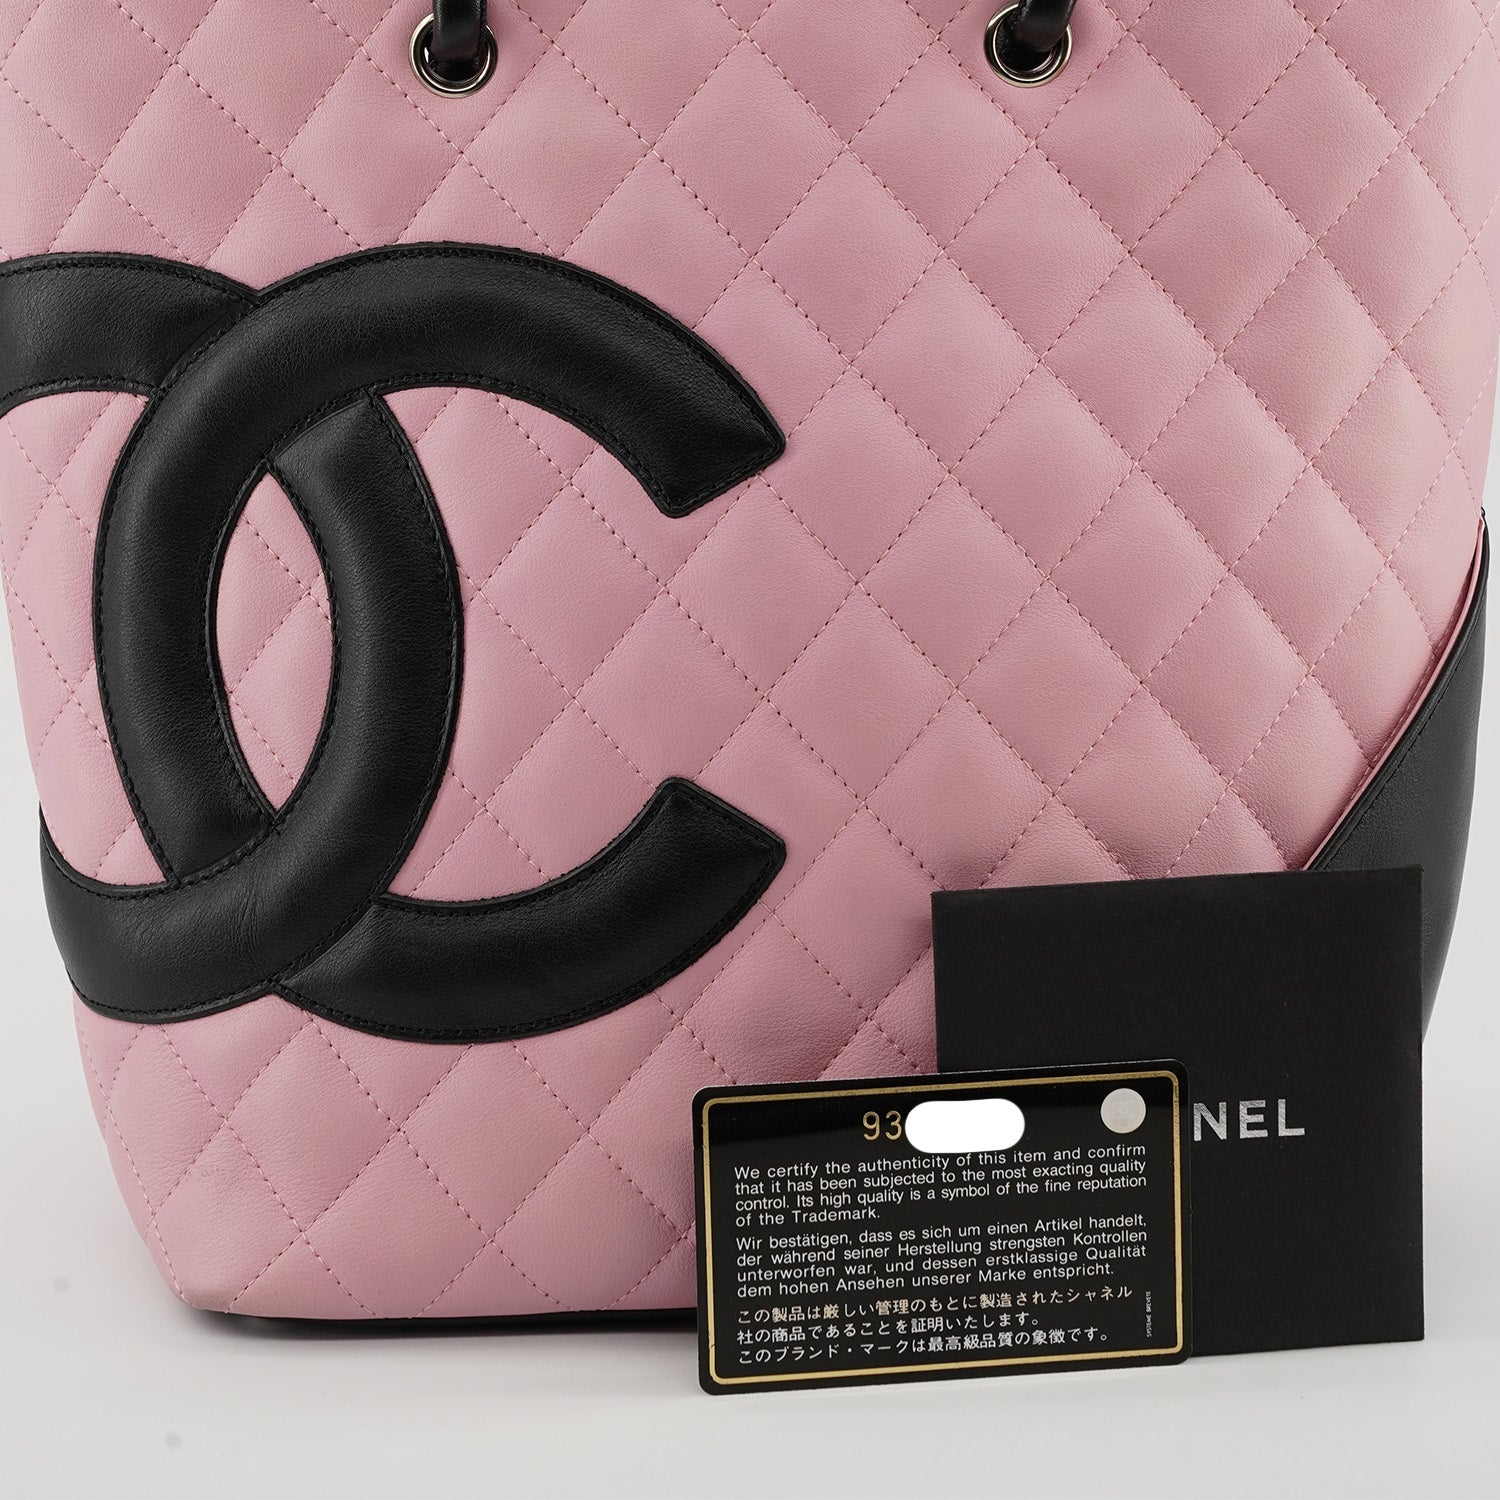 Chanel Pink Large Ligne Cambon Tote